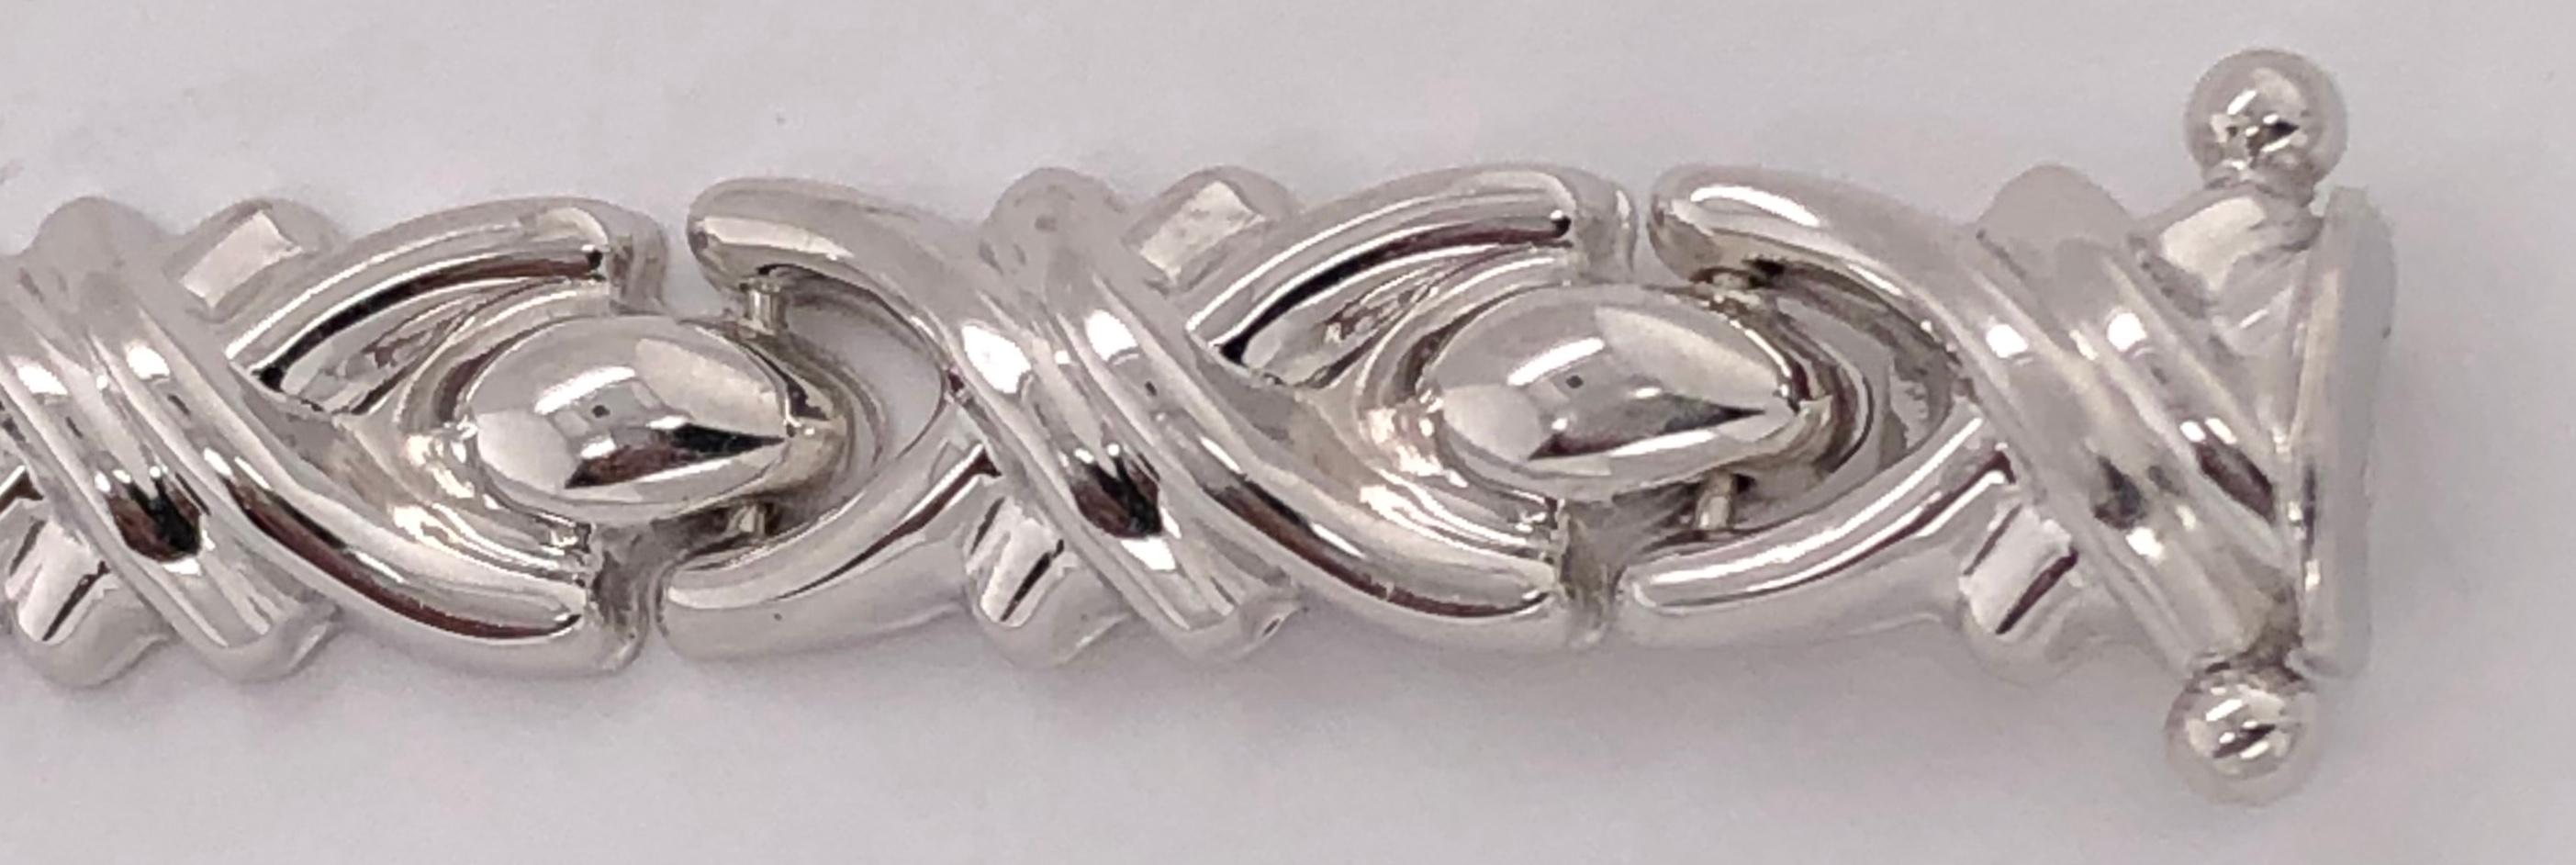 14 Karat White Gold Link Bracelet, Italy In Good Condition For Sale In Stamford, CT